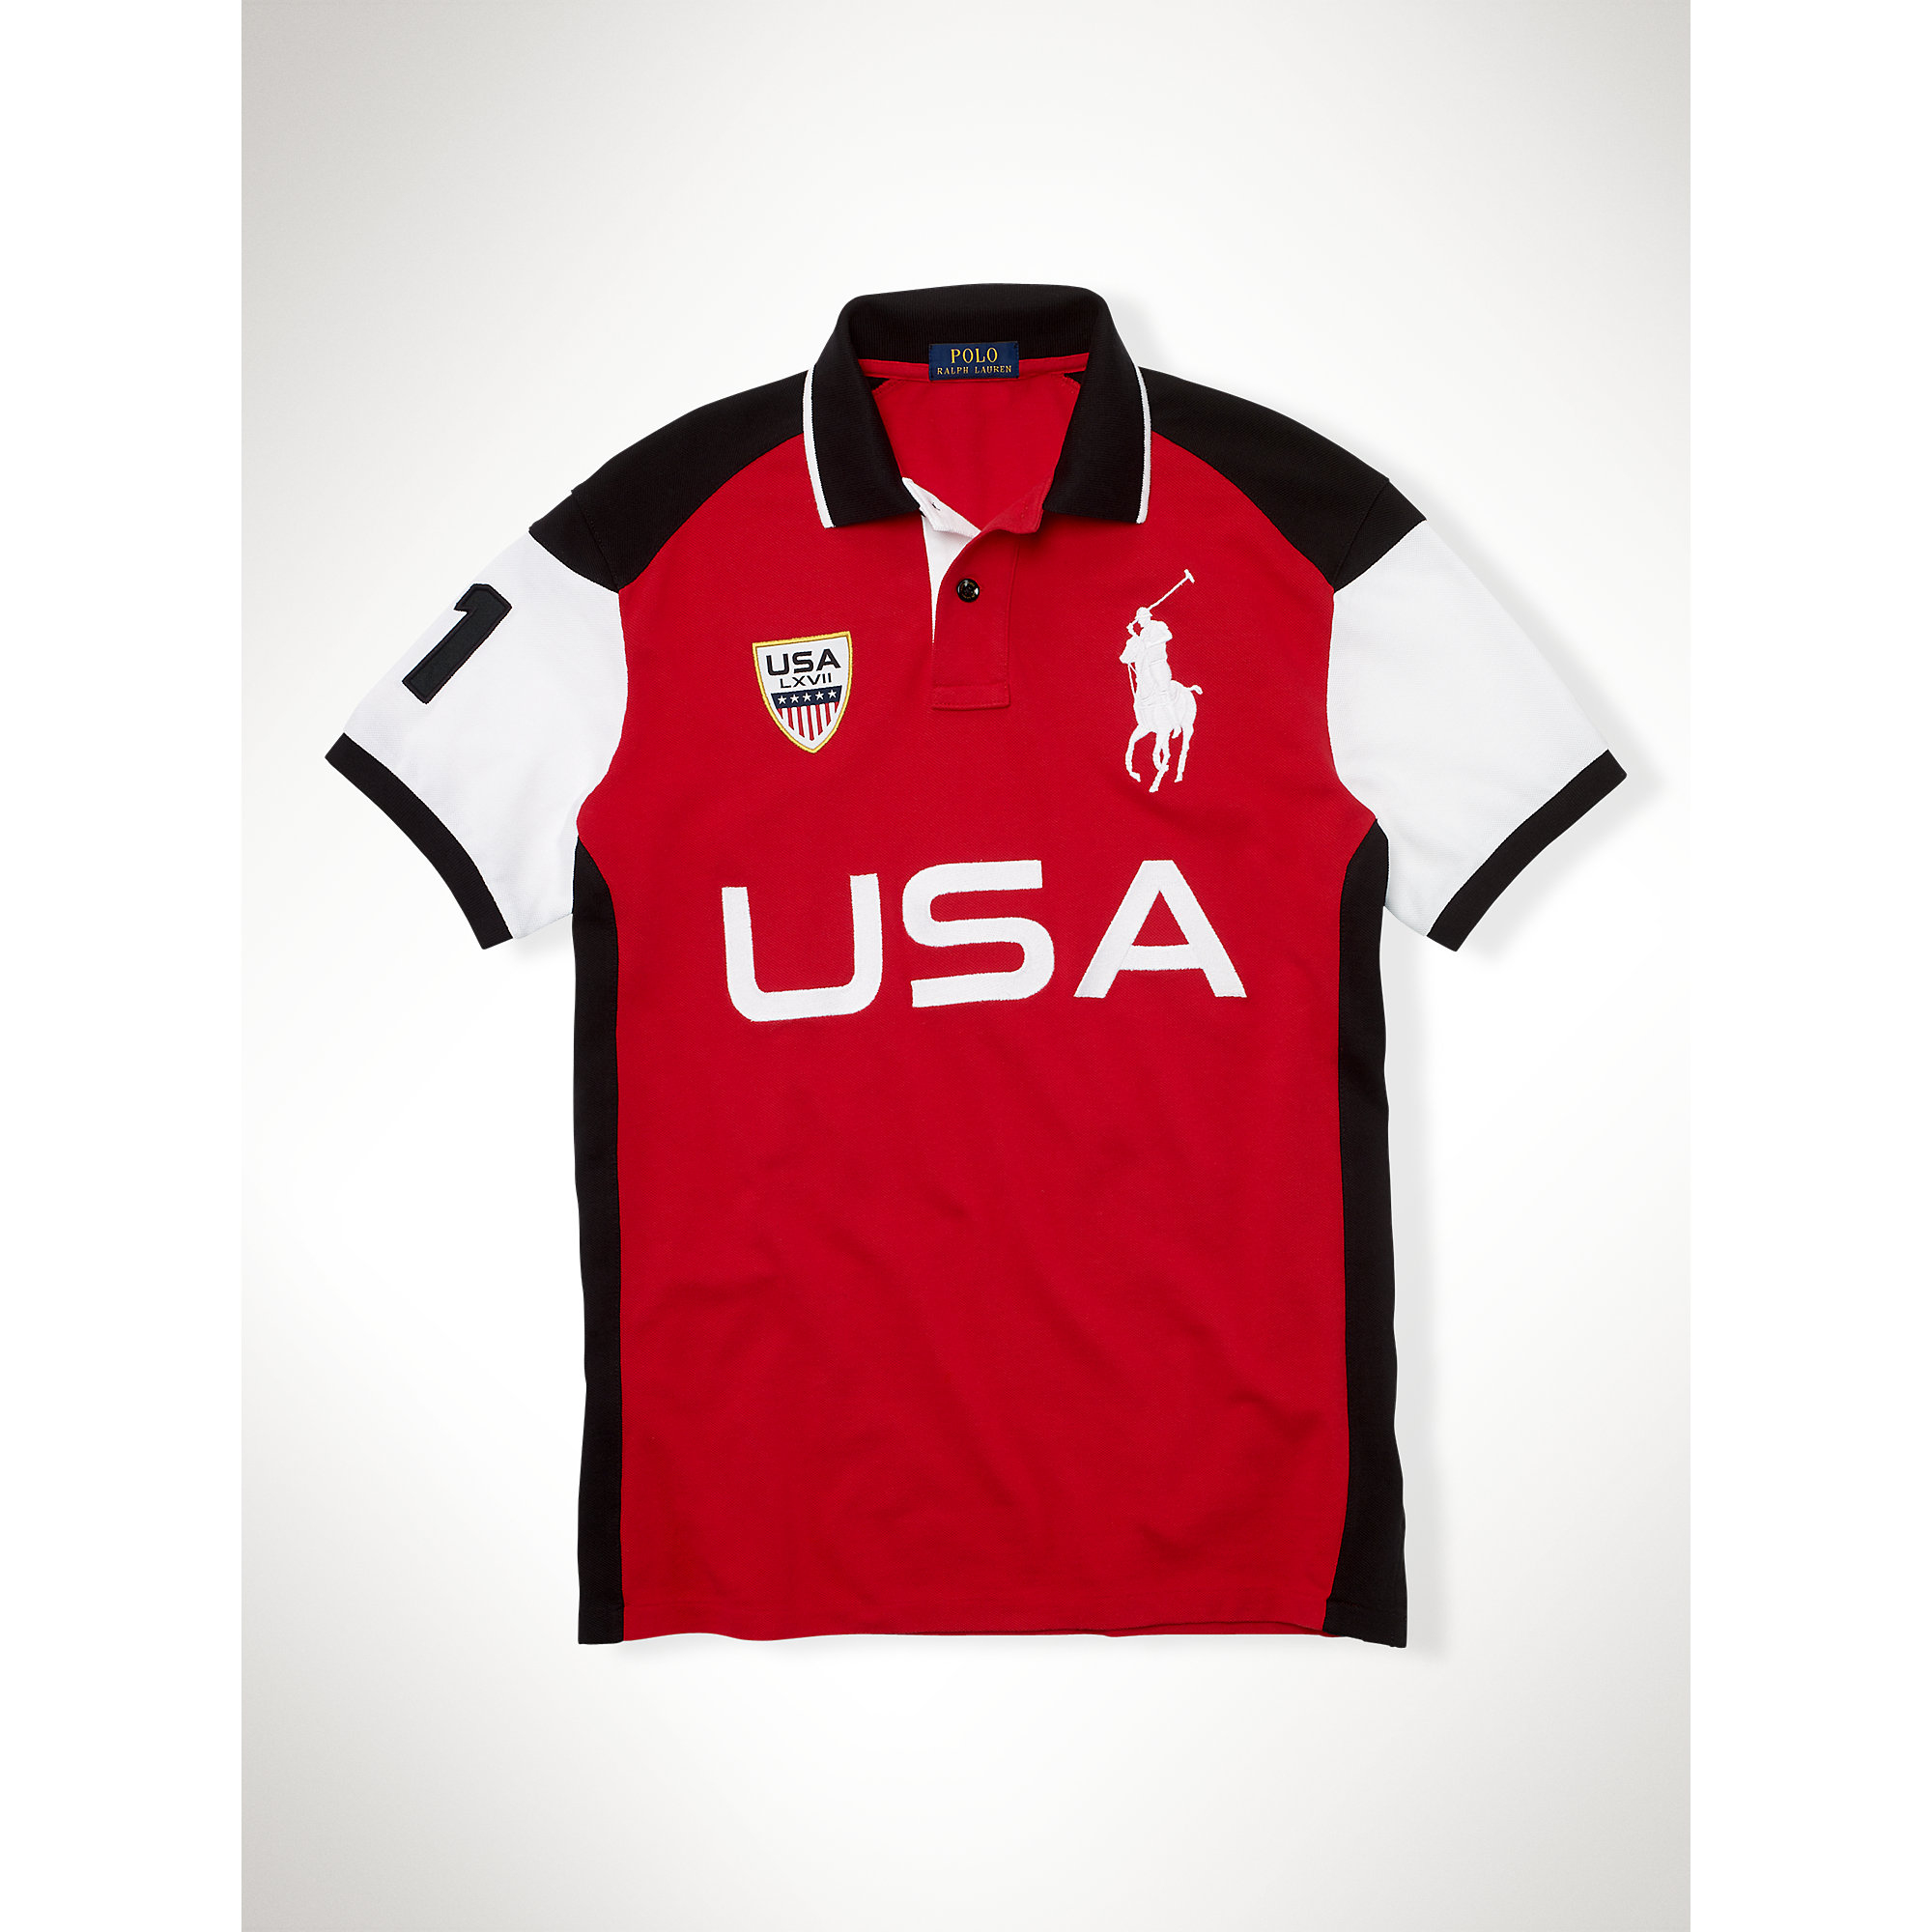 Lyst Polo Ralph Lauren CustomFit "Usa" Polo Shirt in Red for Men